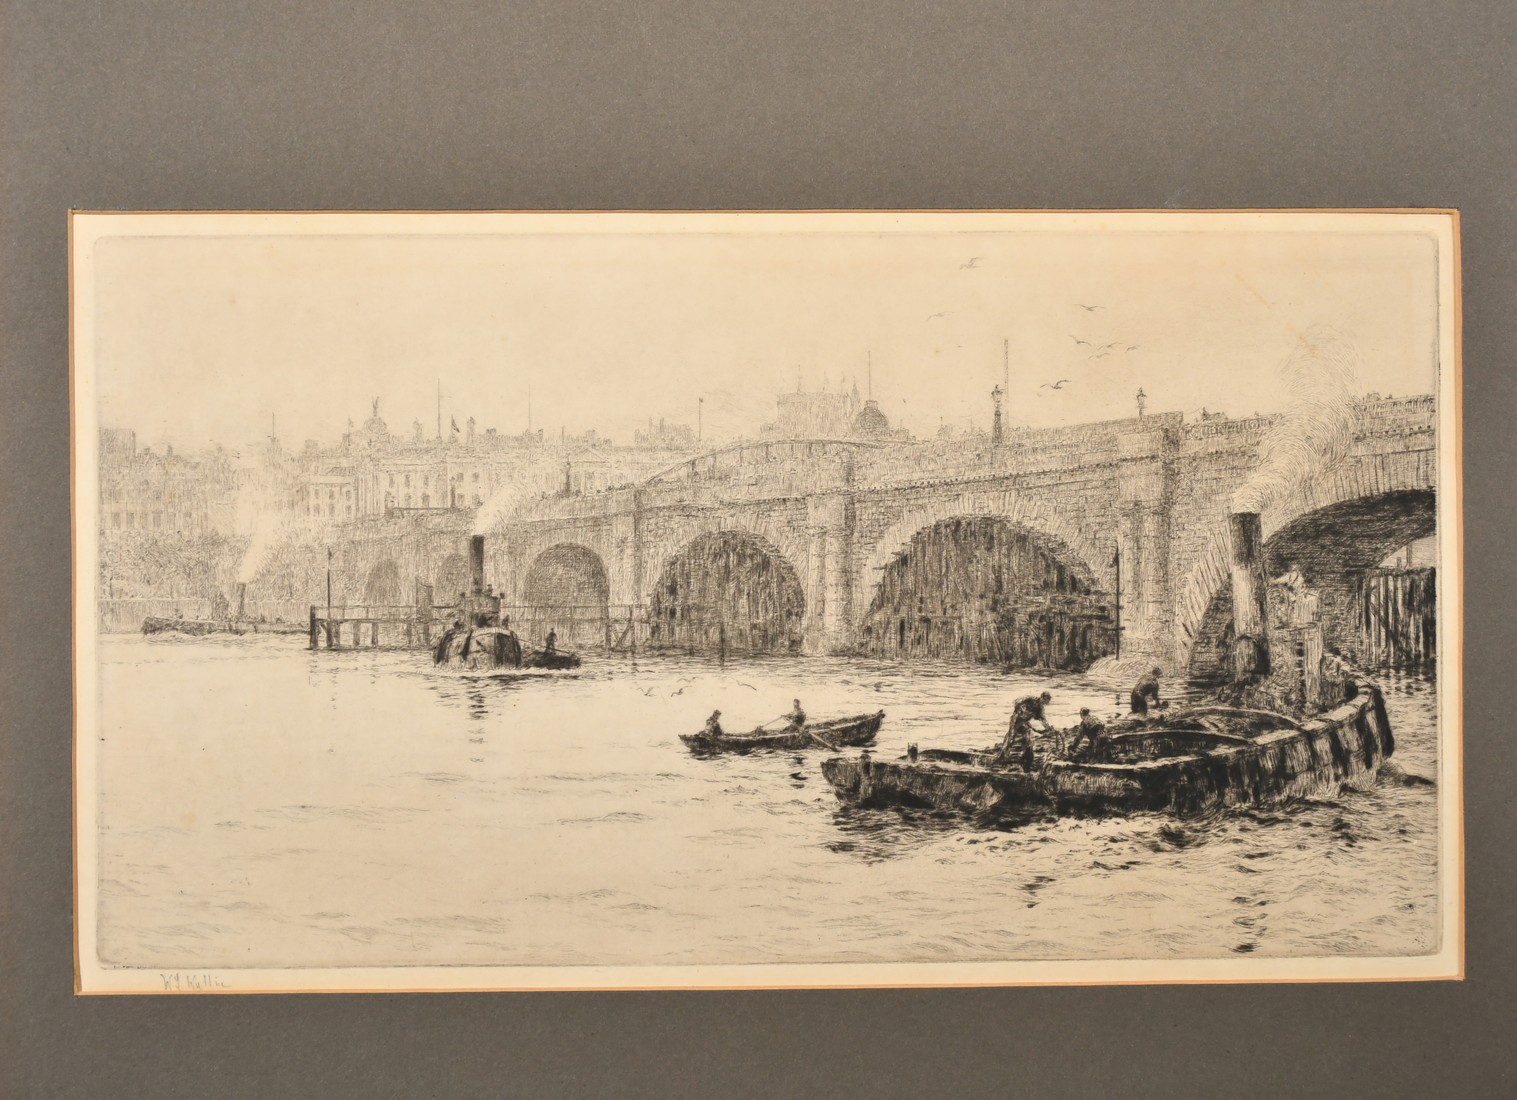 William Lionel Wyllie (1851-1931), Waterloo Bridge, etching, signed in pencil, plate size 7.5" x - Image 2 of 4